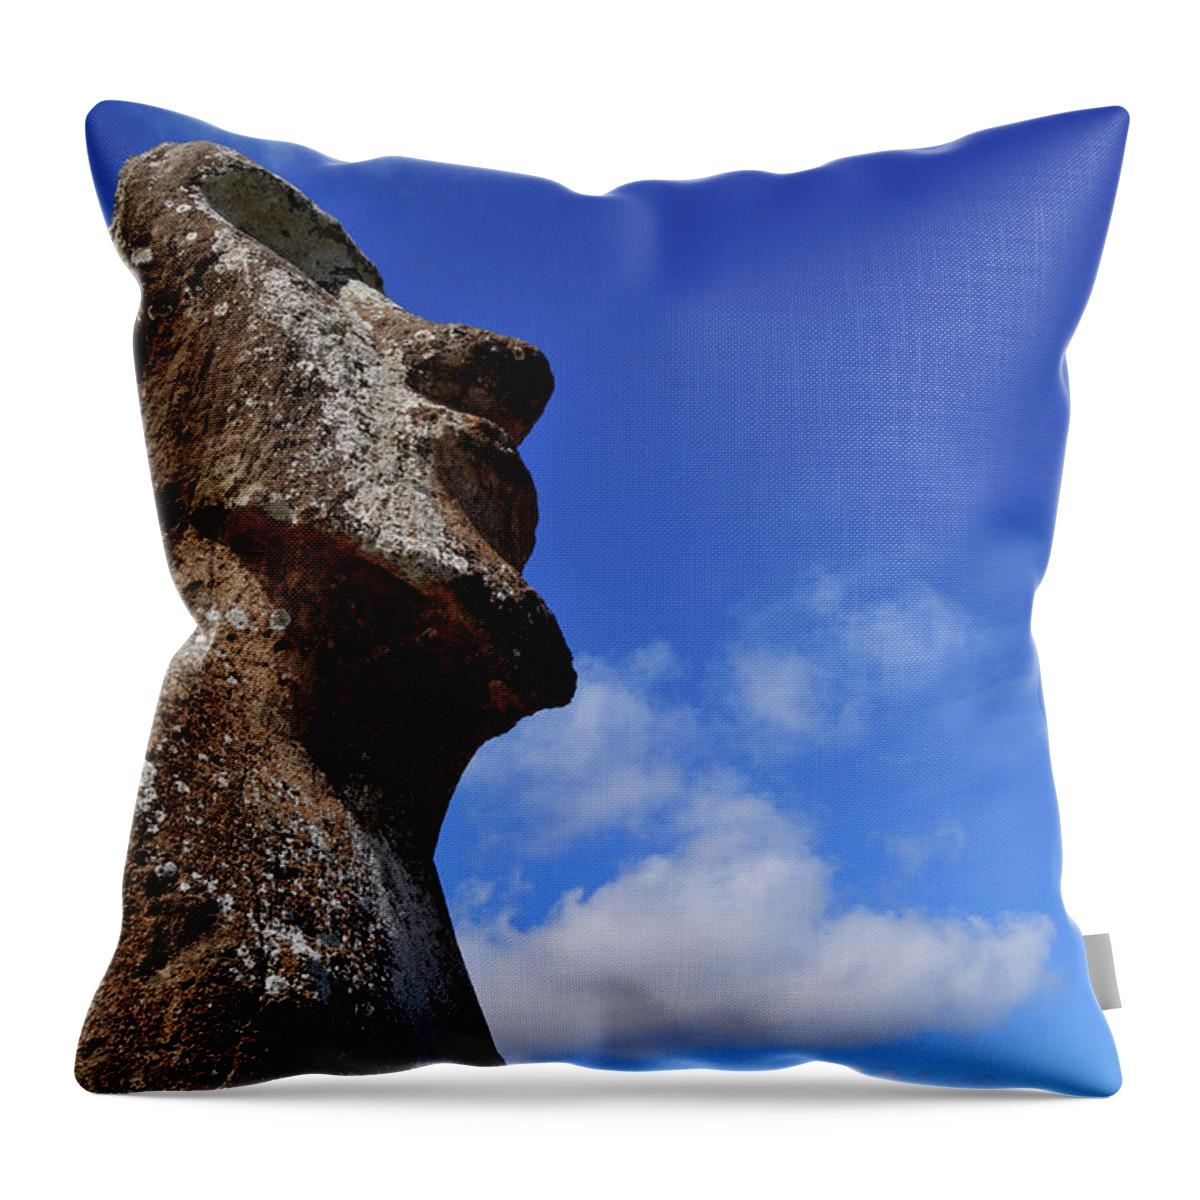 Outdoors Throw Pillow featuring the photograph Easter Island - Moai by Diego Vargas M.